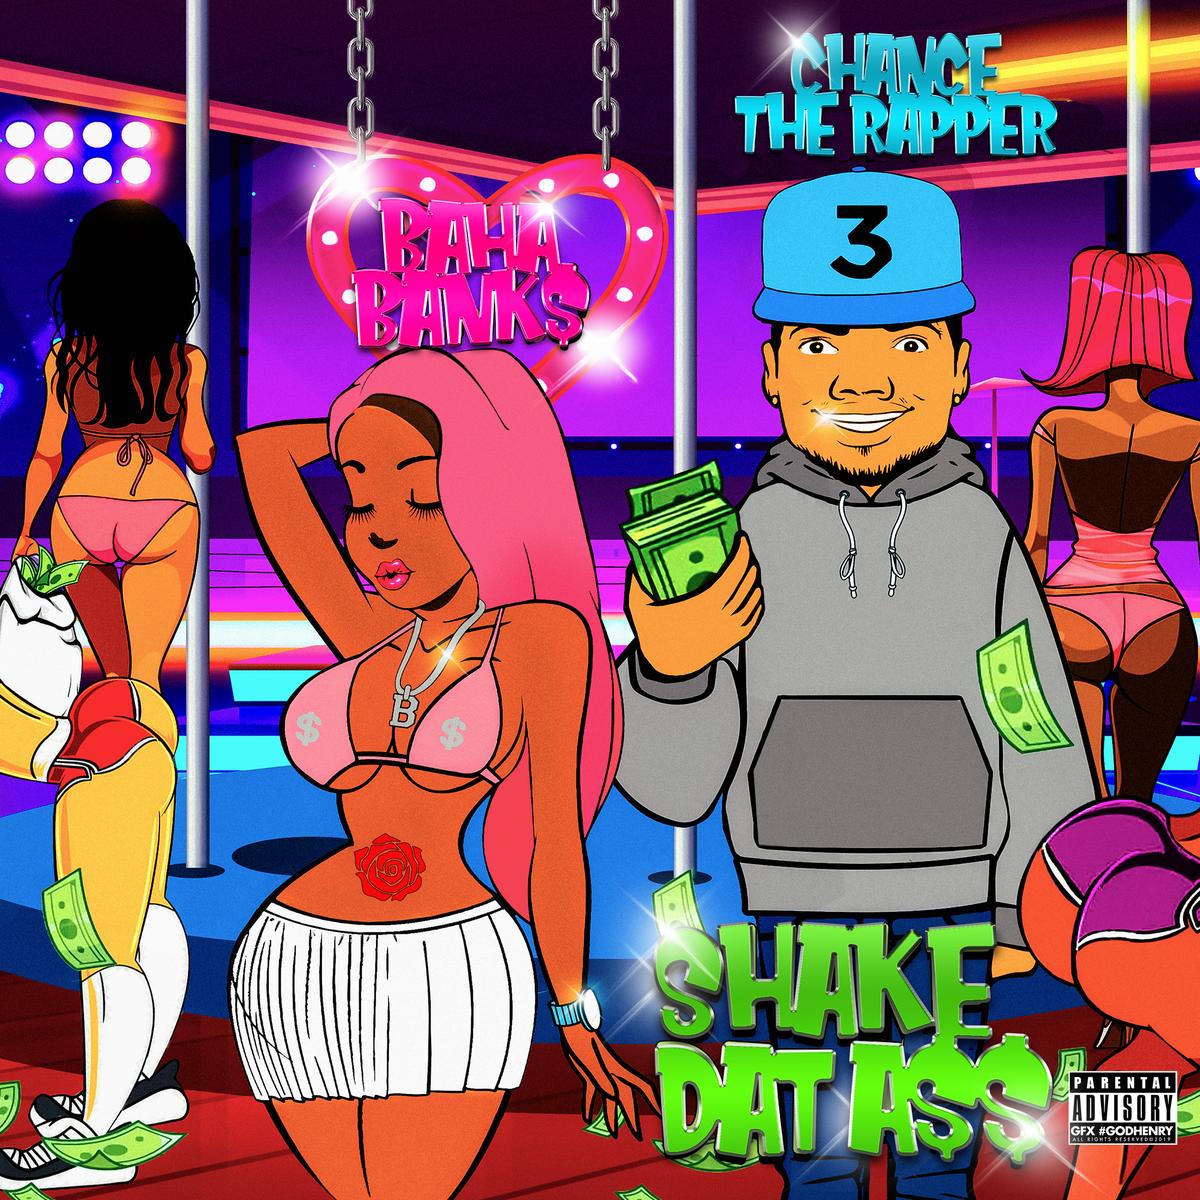 Baha Bank$ Calls On Chance The Rapper For “Shake Dat A$$”